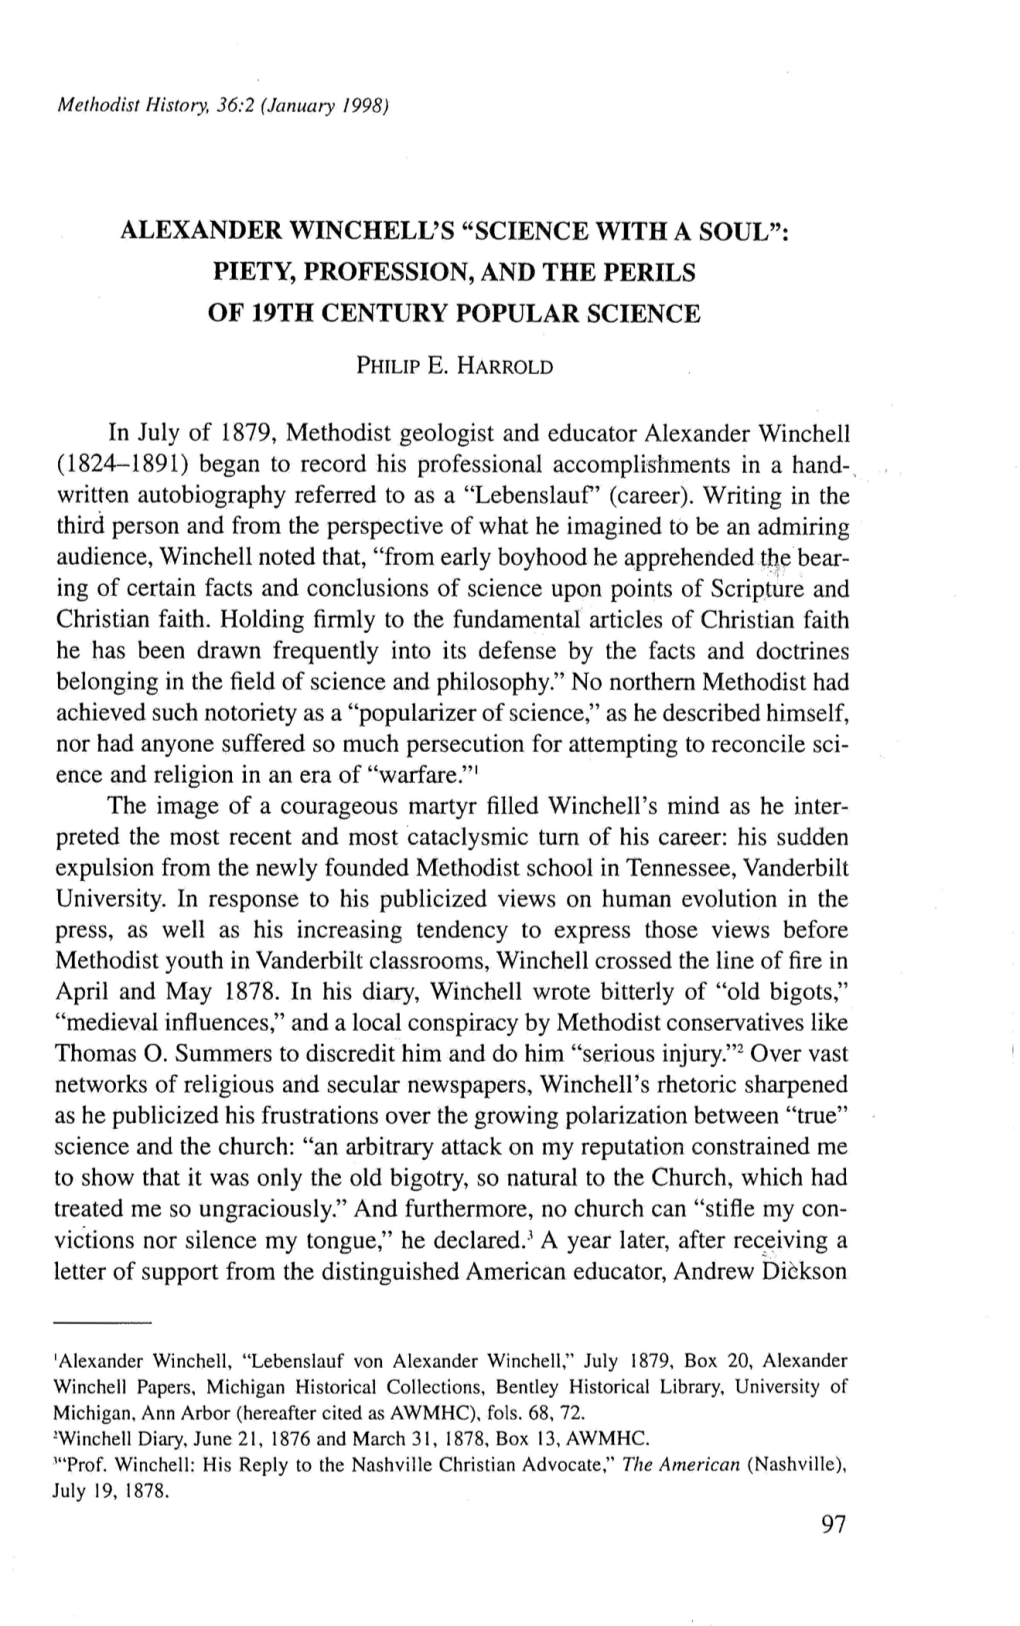 Alexander Winchell's "Science with a Soul": Piety, Profession, and the Perils of 19Th Century Popular Science